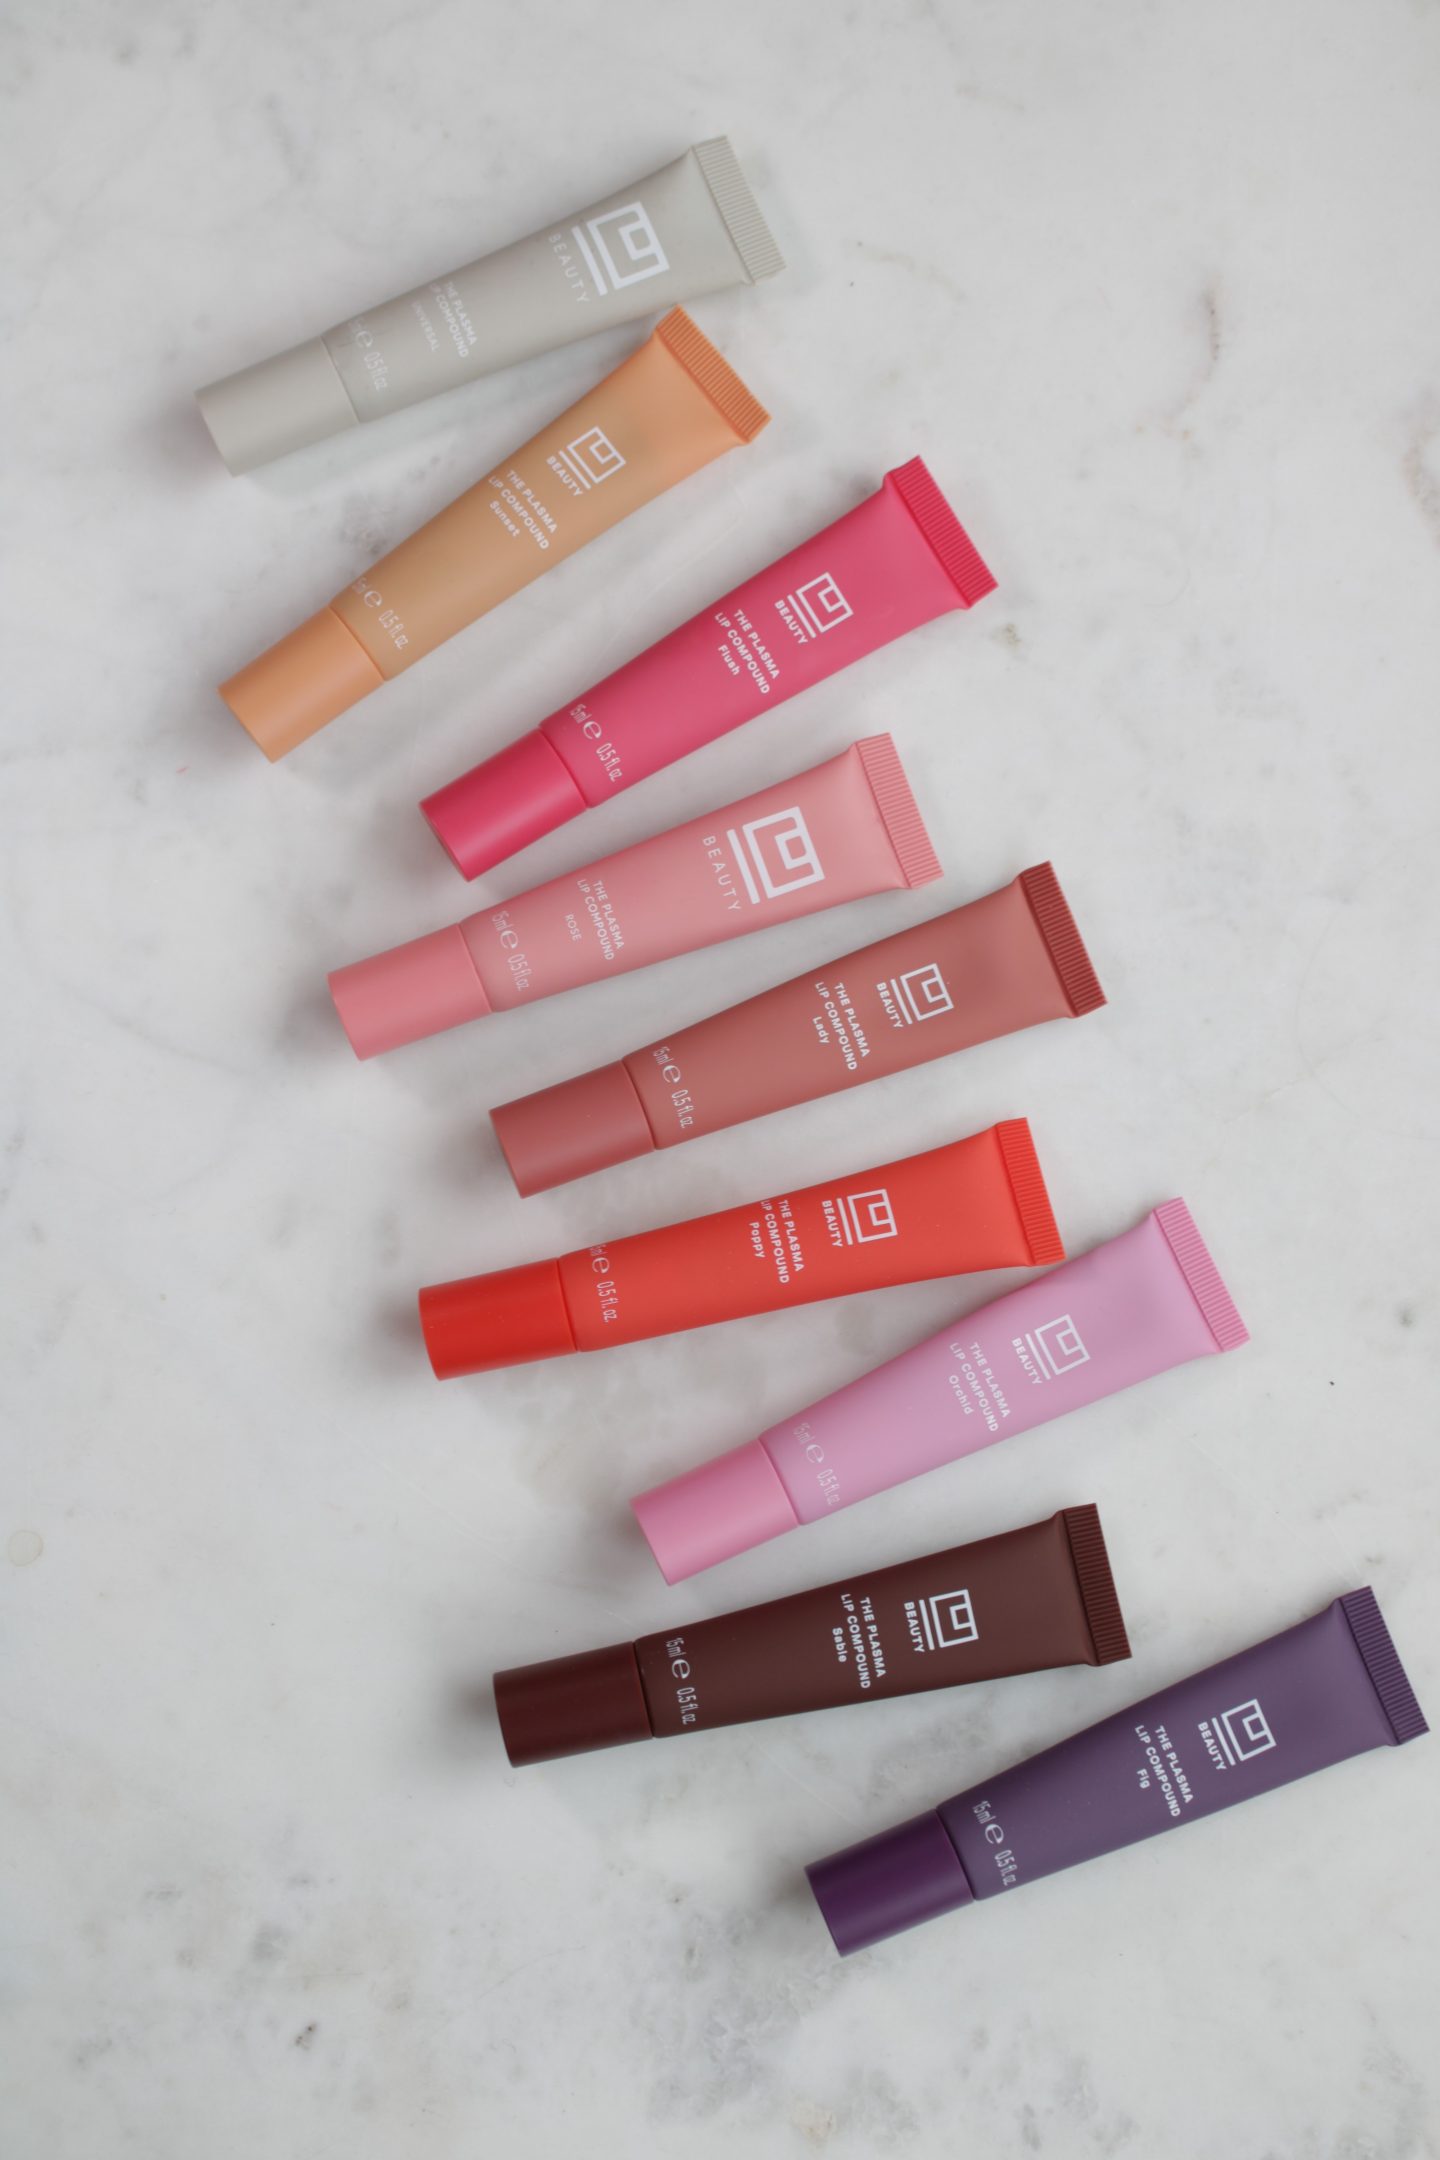 U Beauty New Discoveries | New Shades of The PLASMA Lip Compound